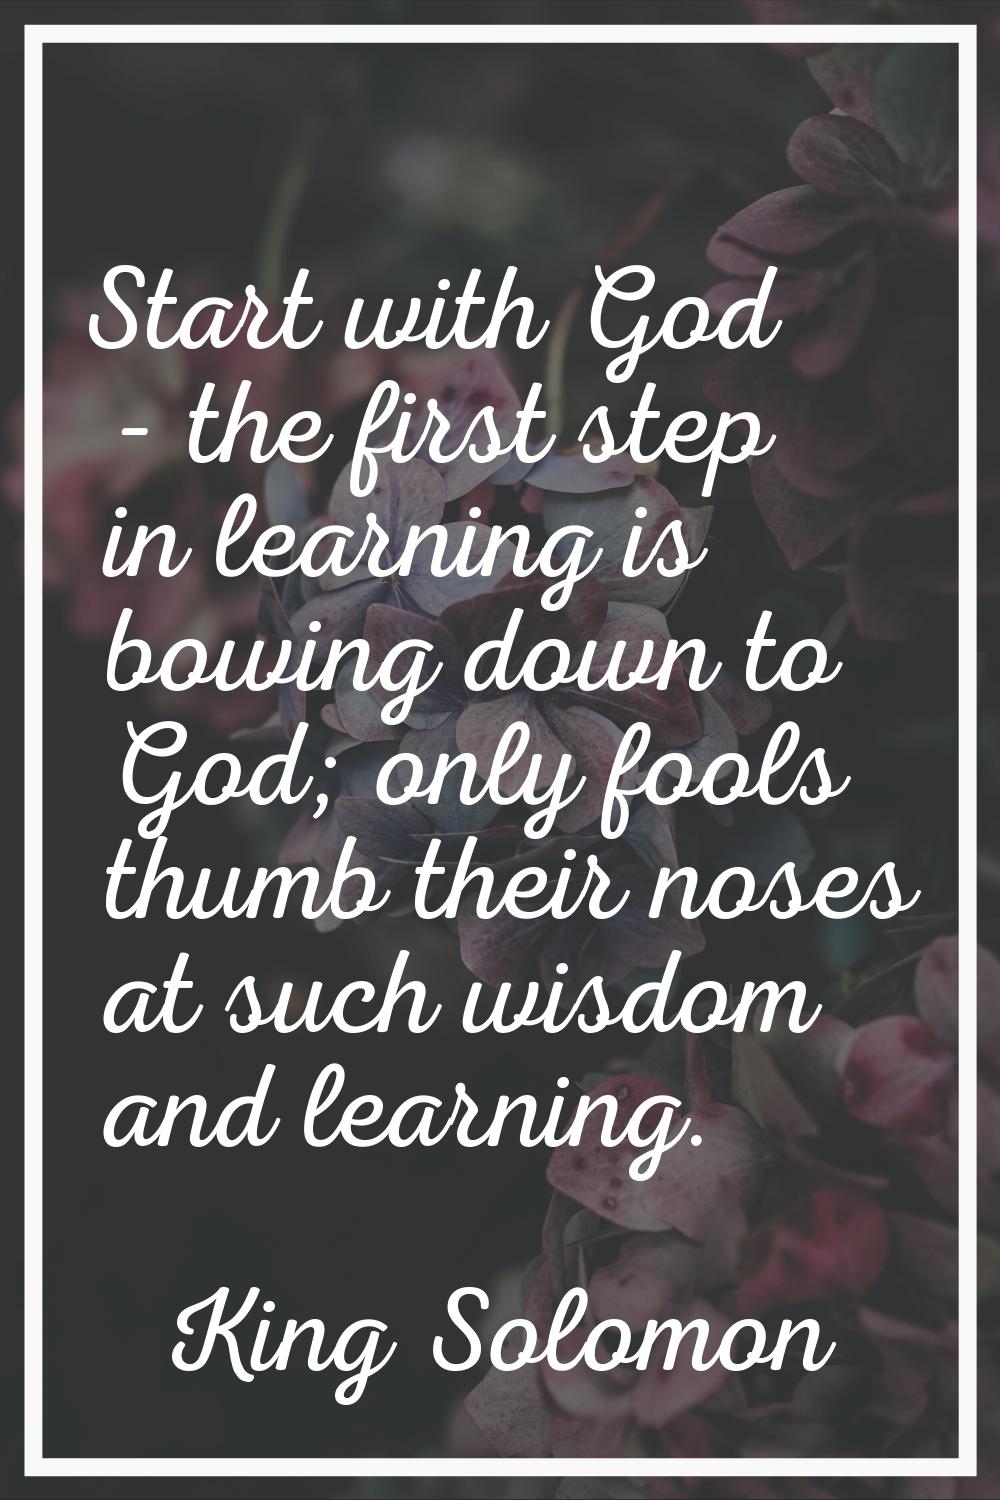 Start with God - the first step in learning is bowing down to God; only fools thumb their noses at 